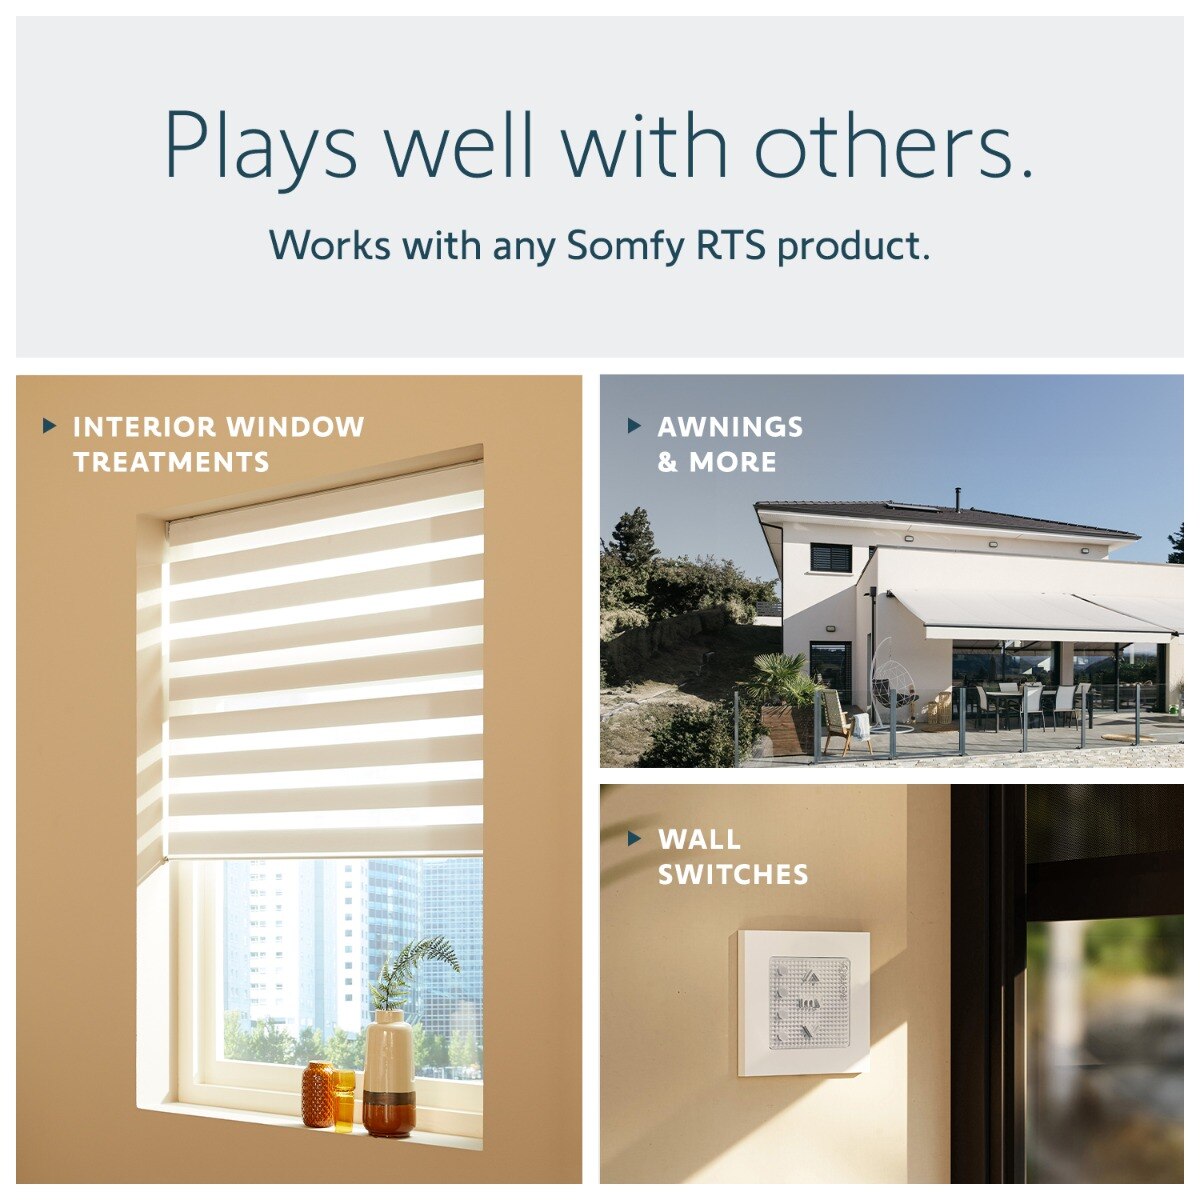 Somfy Telis 1 RTS Patio Remote, 1 Channel